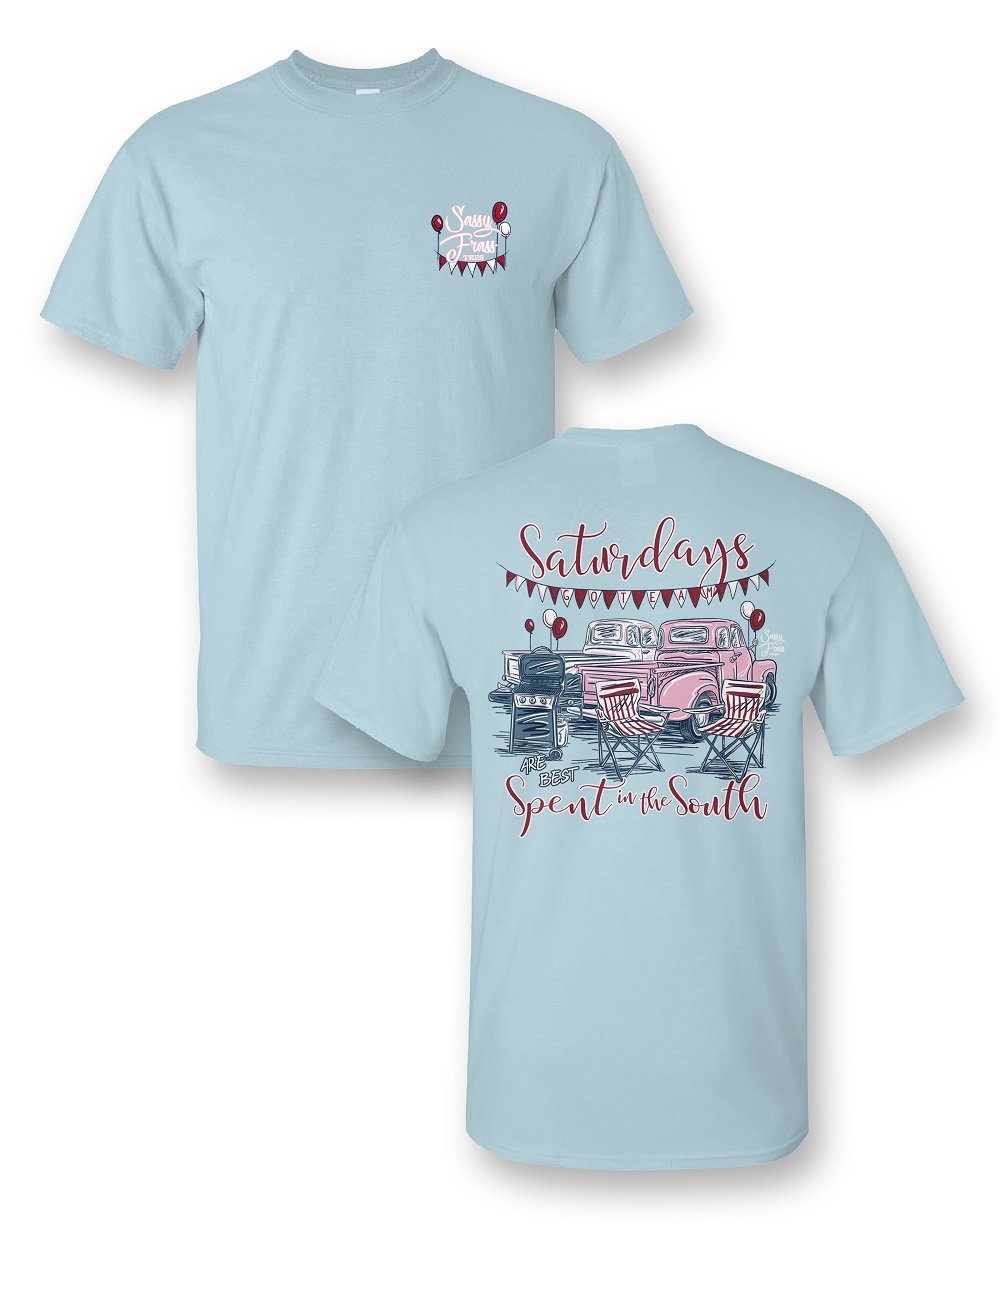 Sassy Frass Saturdays Spent in the South Tailgating Comfort Colors Girlie Bright T Shirt